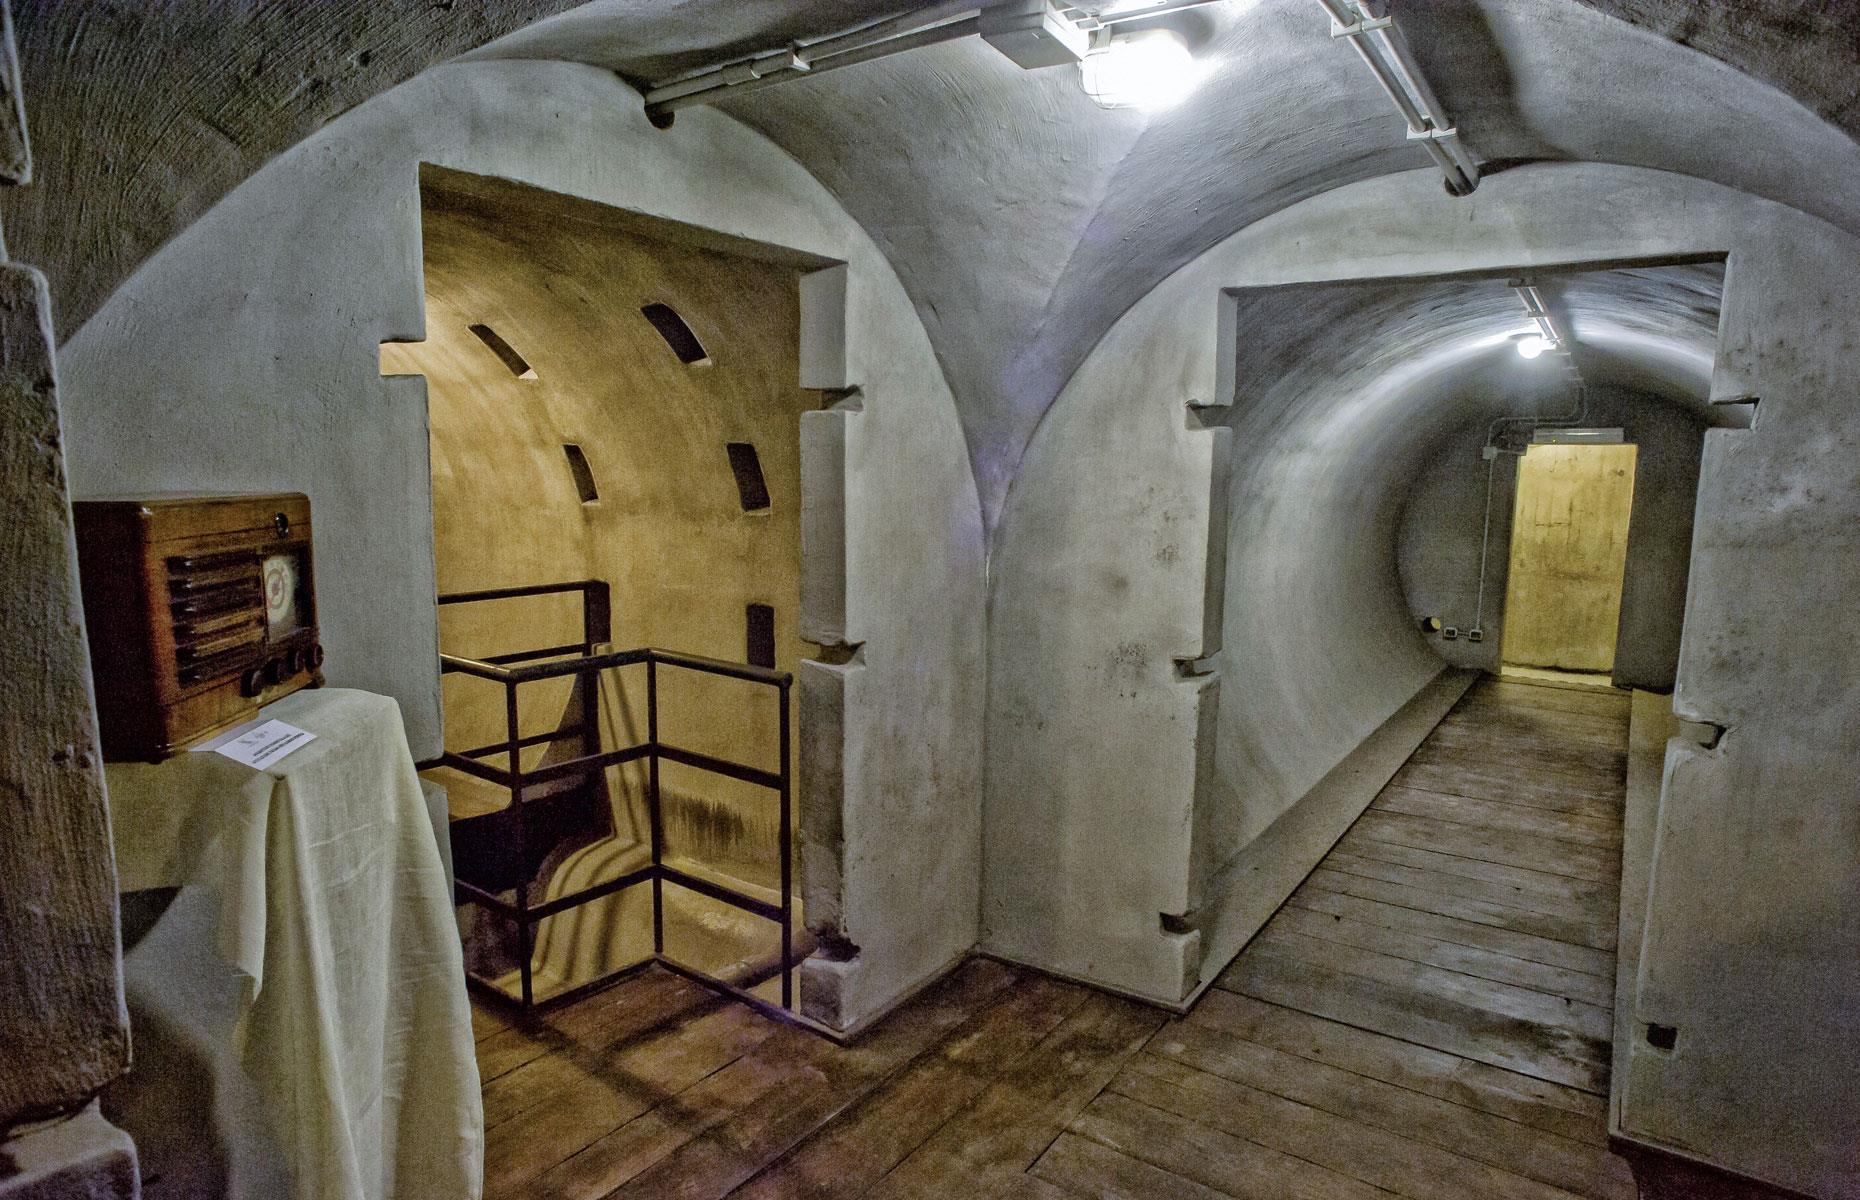 <p>Mussolini had seen Hitler's array of <a href="https://www.loveproperty.com/gallerylist/95780/dream-homes-for-sale-with-their-own-private-bunkers">wow-factor bunkers</a> and was green with envy. Desperate to keep up with his fellow fascist tyrant, he went for the most advanced installation money could buy. The cross-shaped facility was built more than 20 feet under the villa's piazza and fitted with 13-foot-thick concrete walls that could resist the most potent conventional bombs.</p>